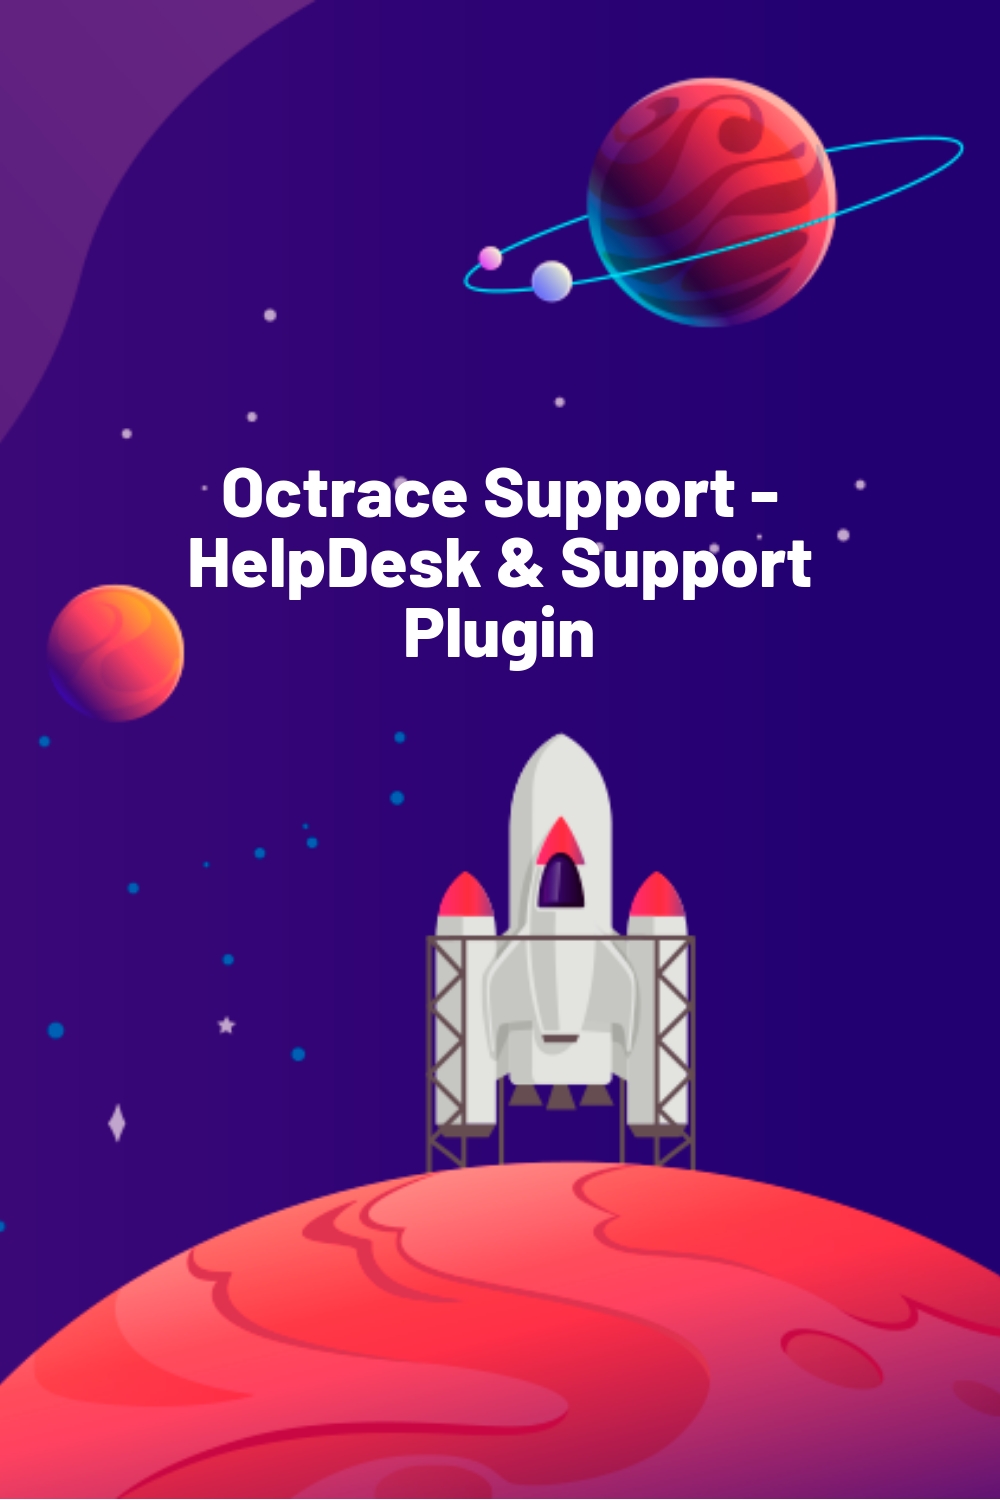 Octrace Support – HelpDesk & Support Plugin